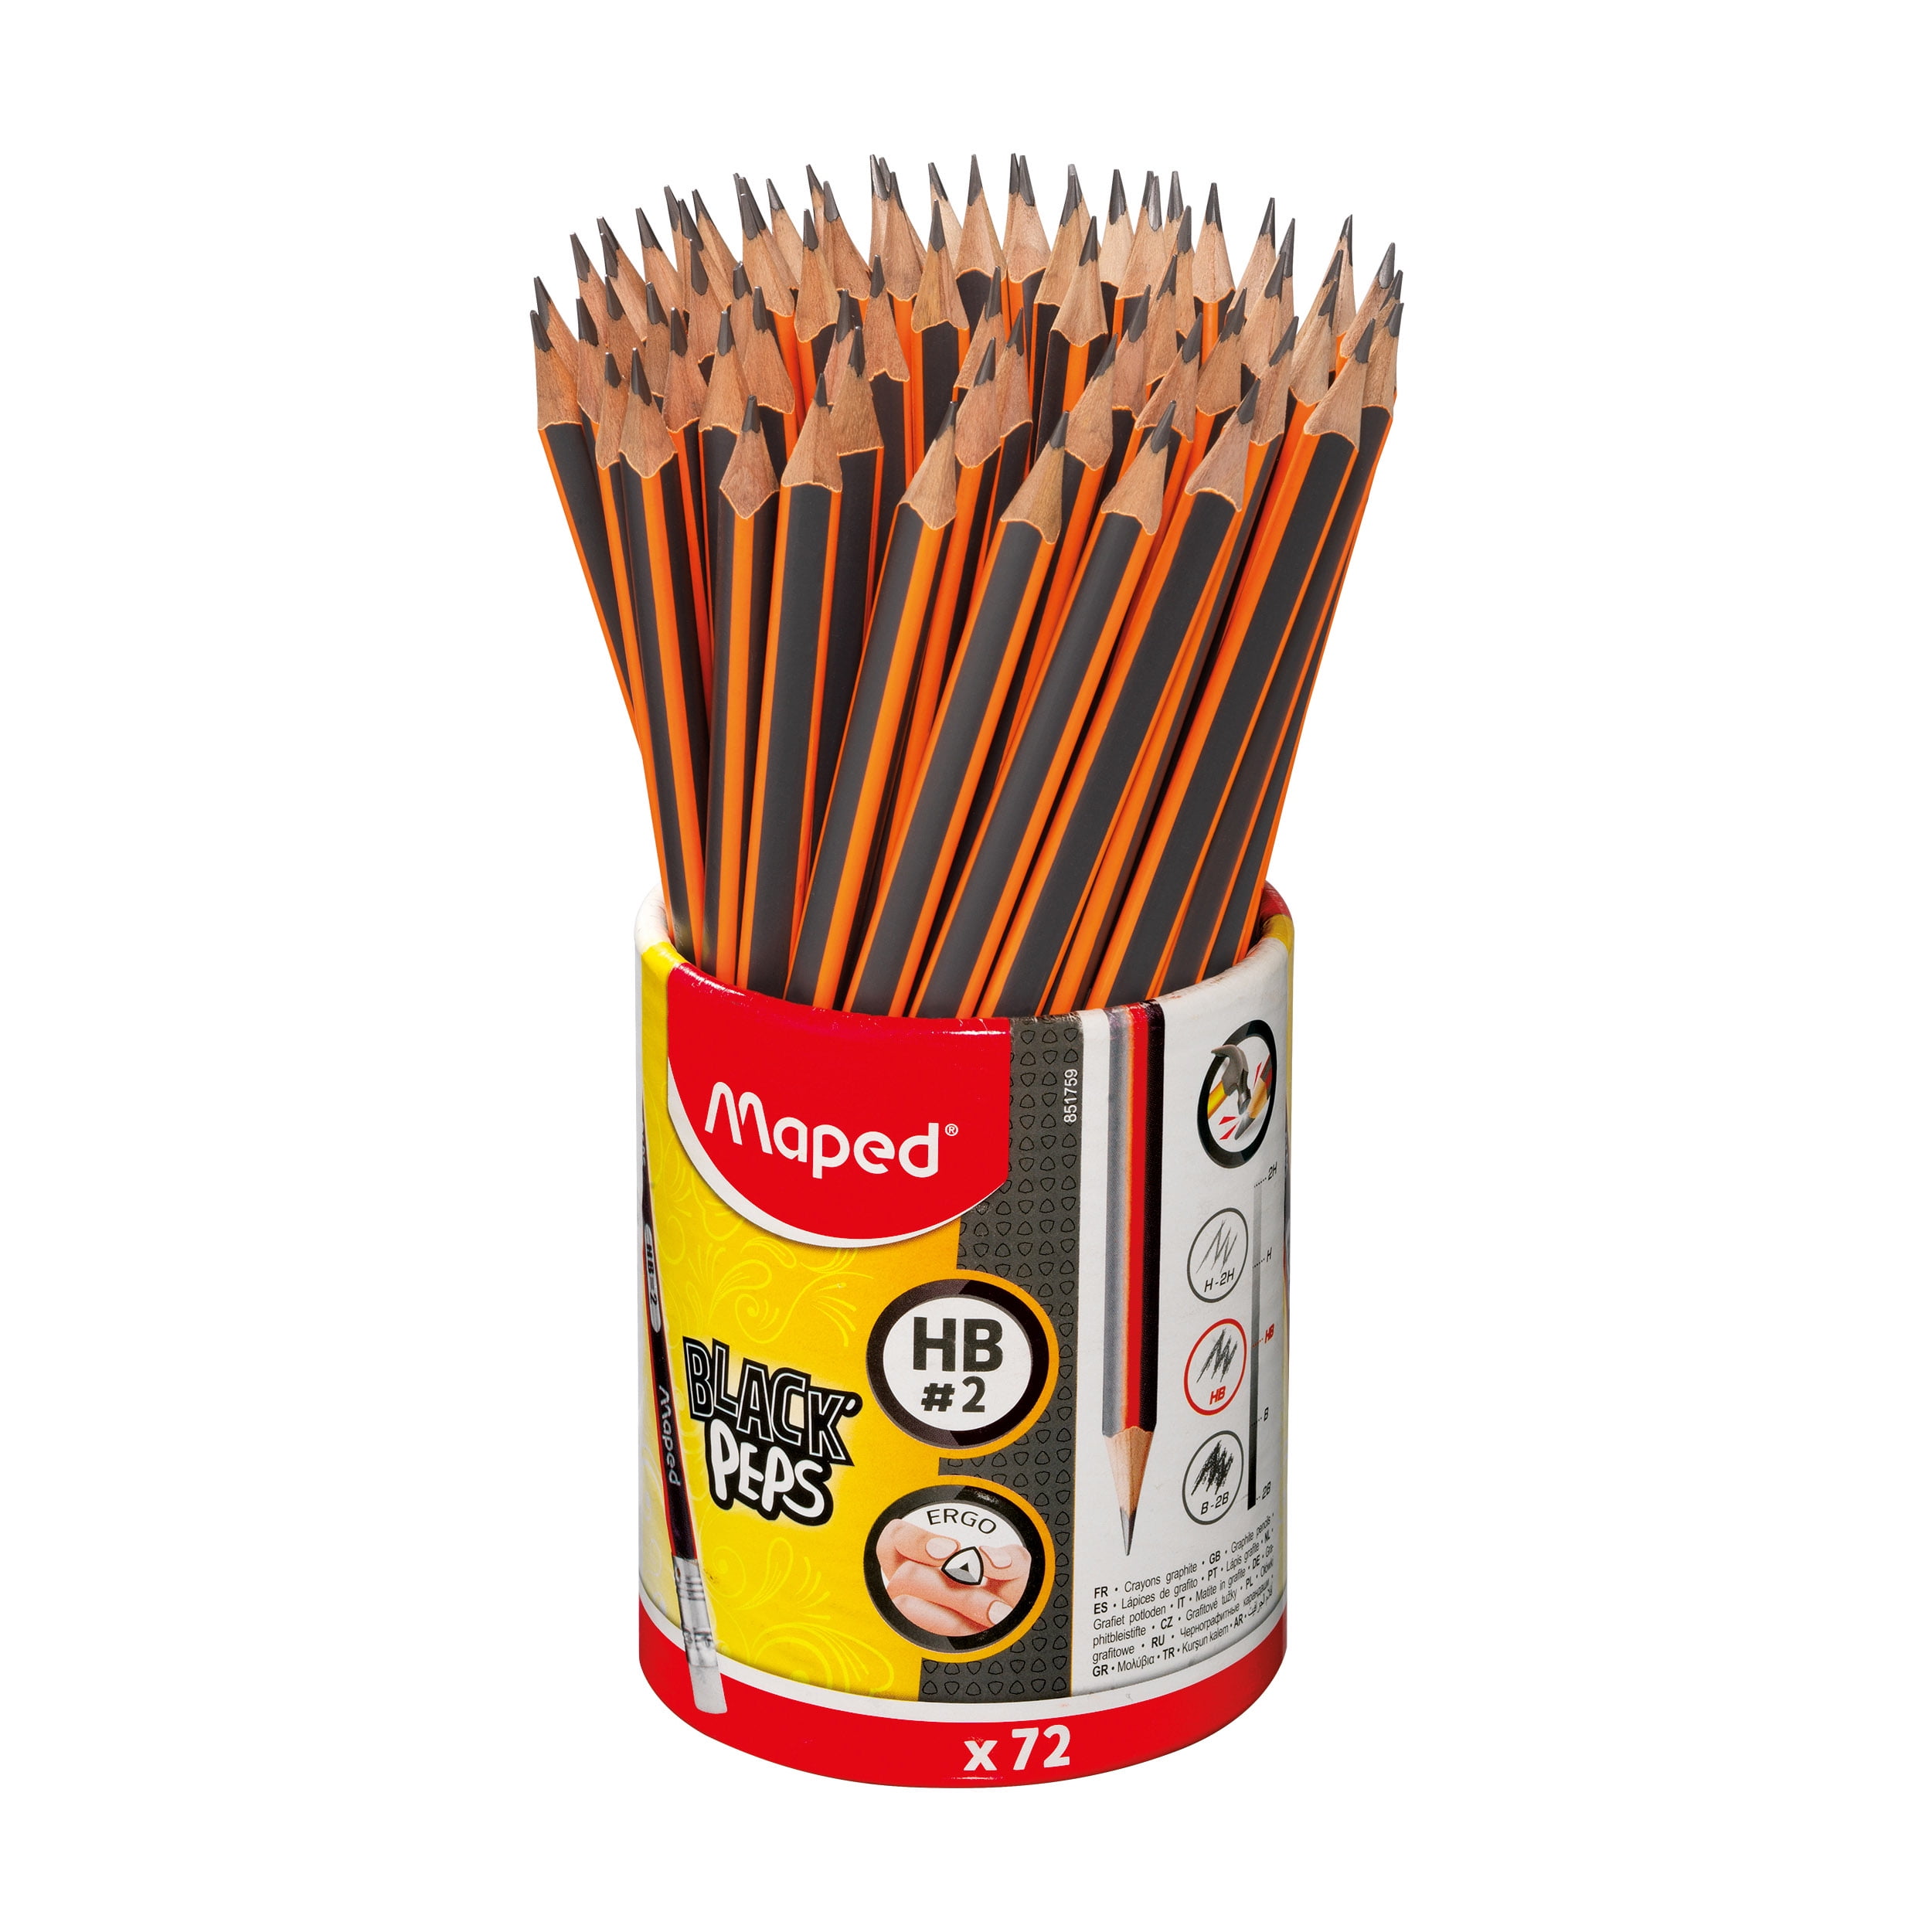 Maped Pre-sharpened Triangular Graphite #2 Pencils in Reusable Cup - 72 Pack